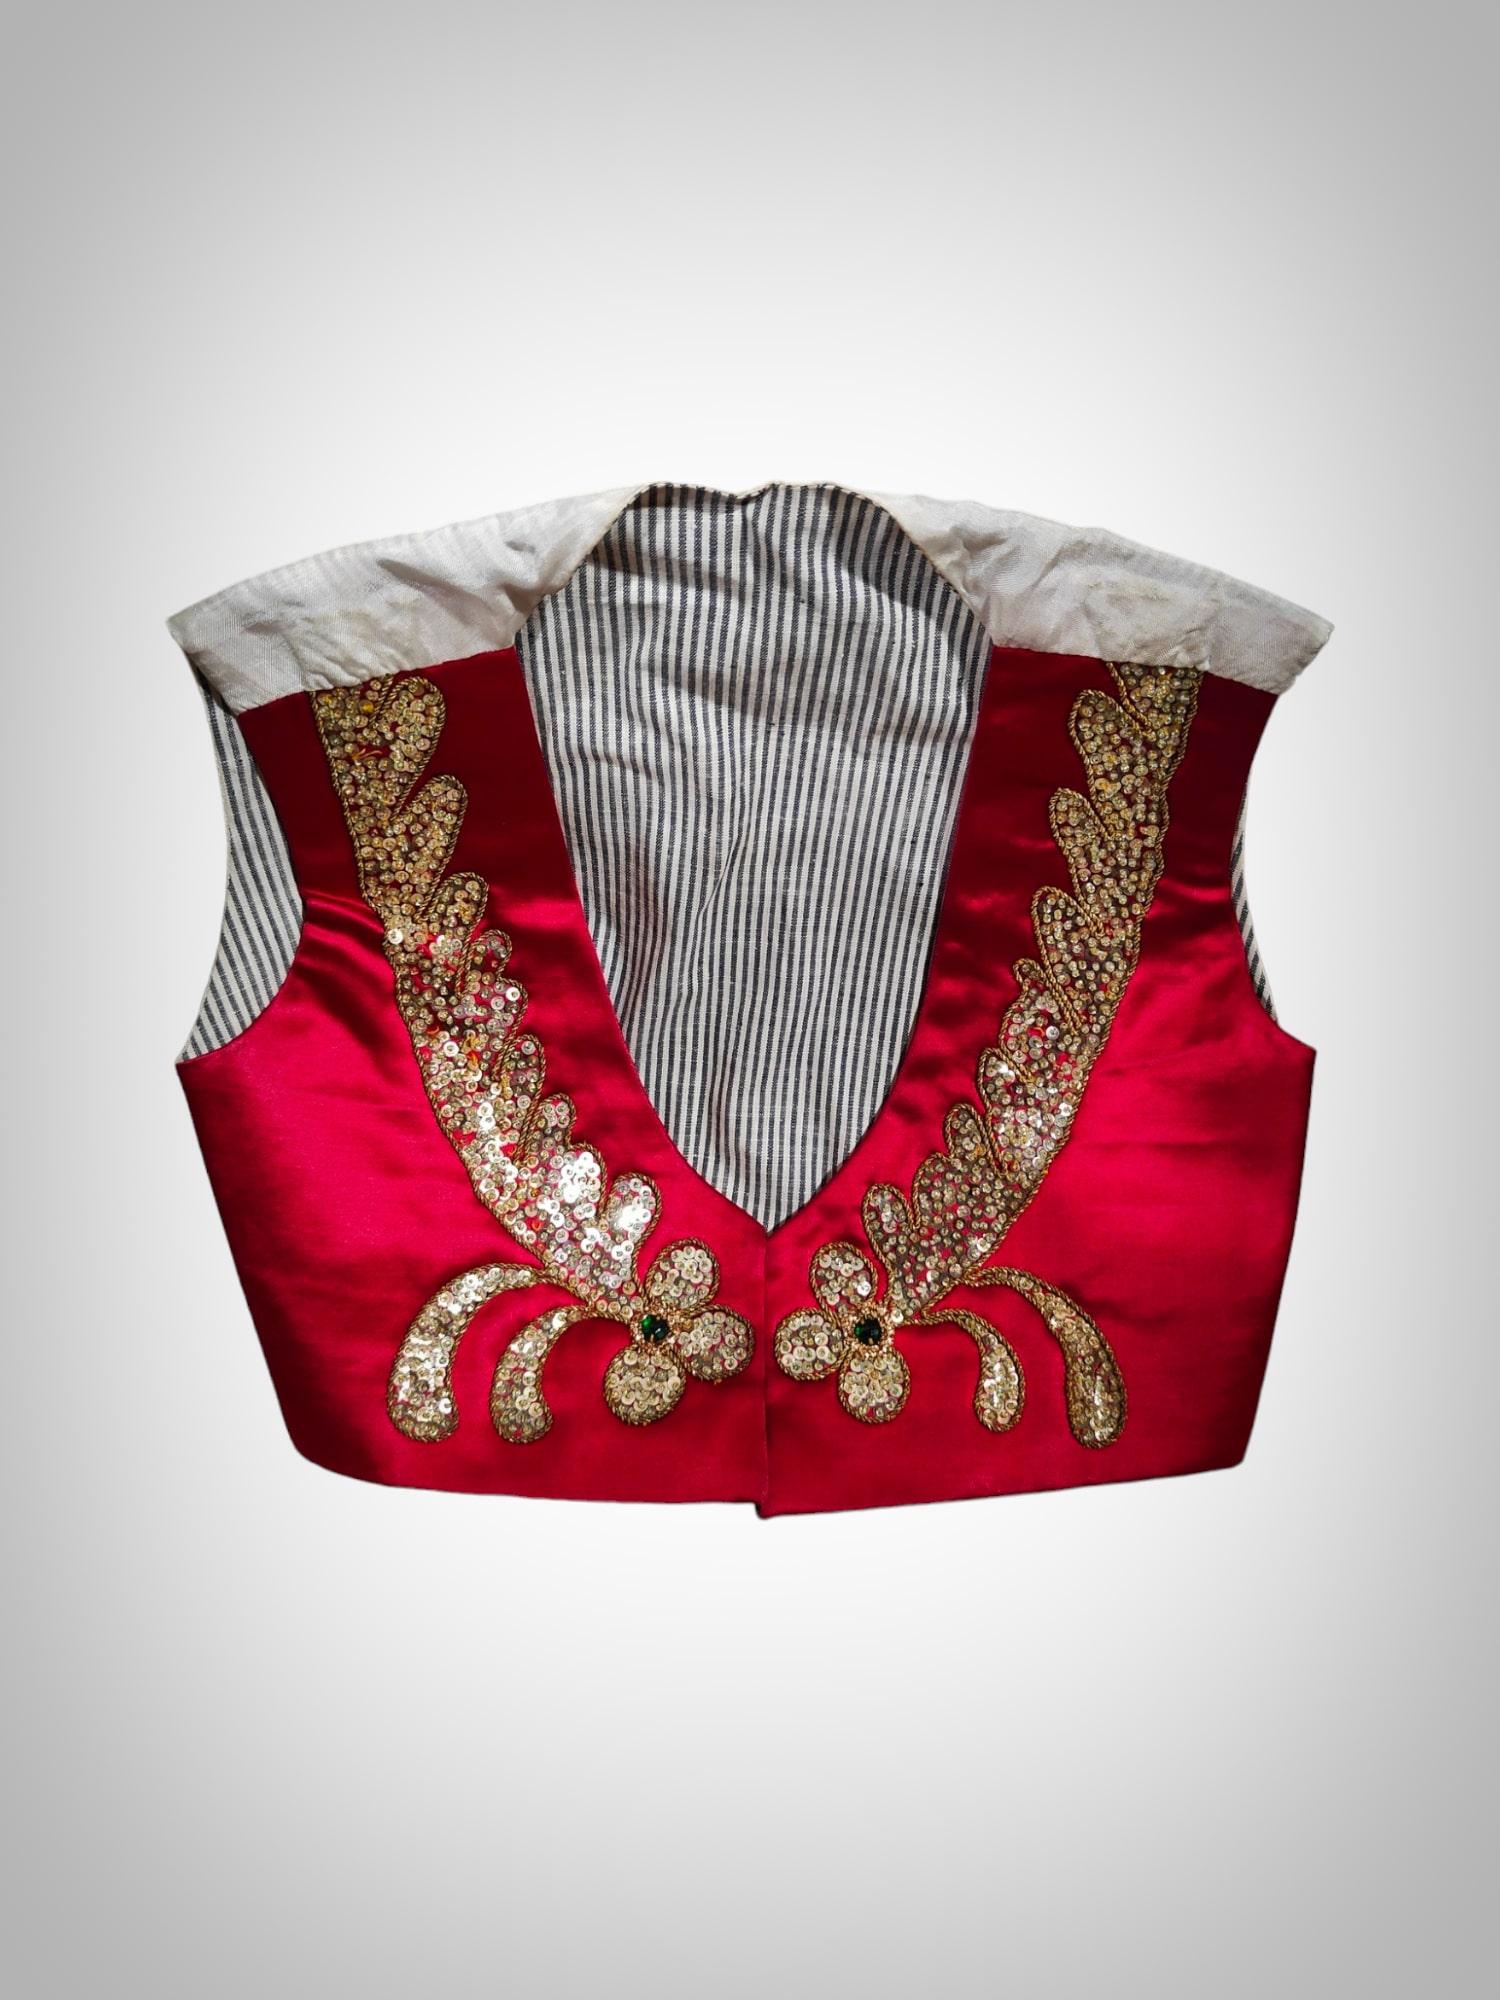 Silk Bullfighter Costume for Children from the 20th Century - A Gem of Children's Bul For Sale